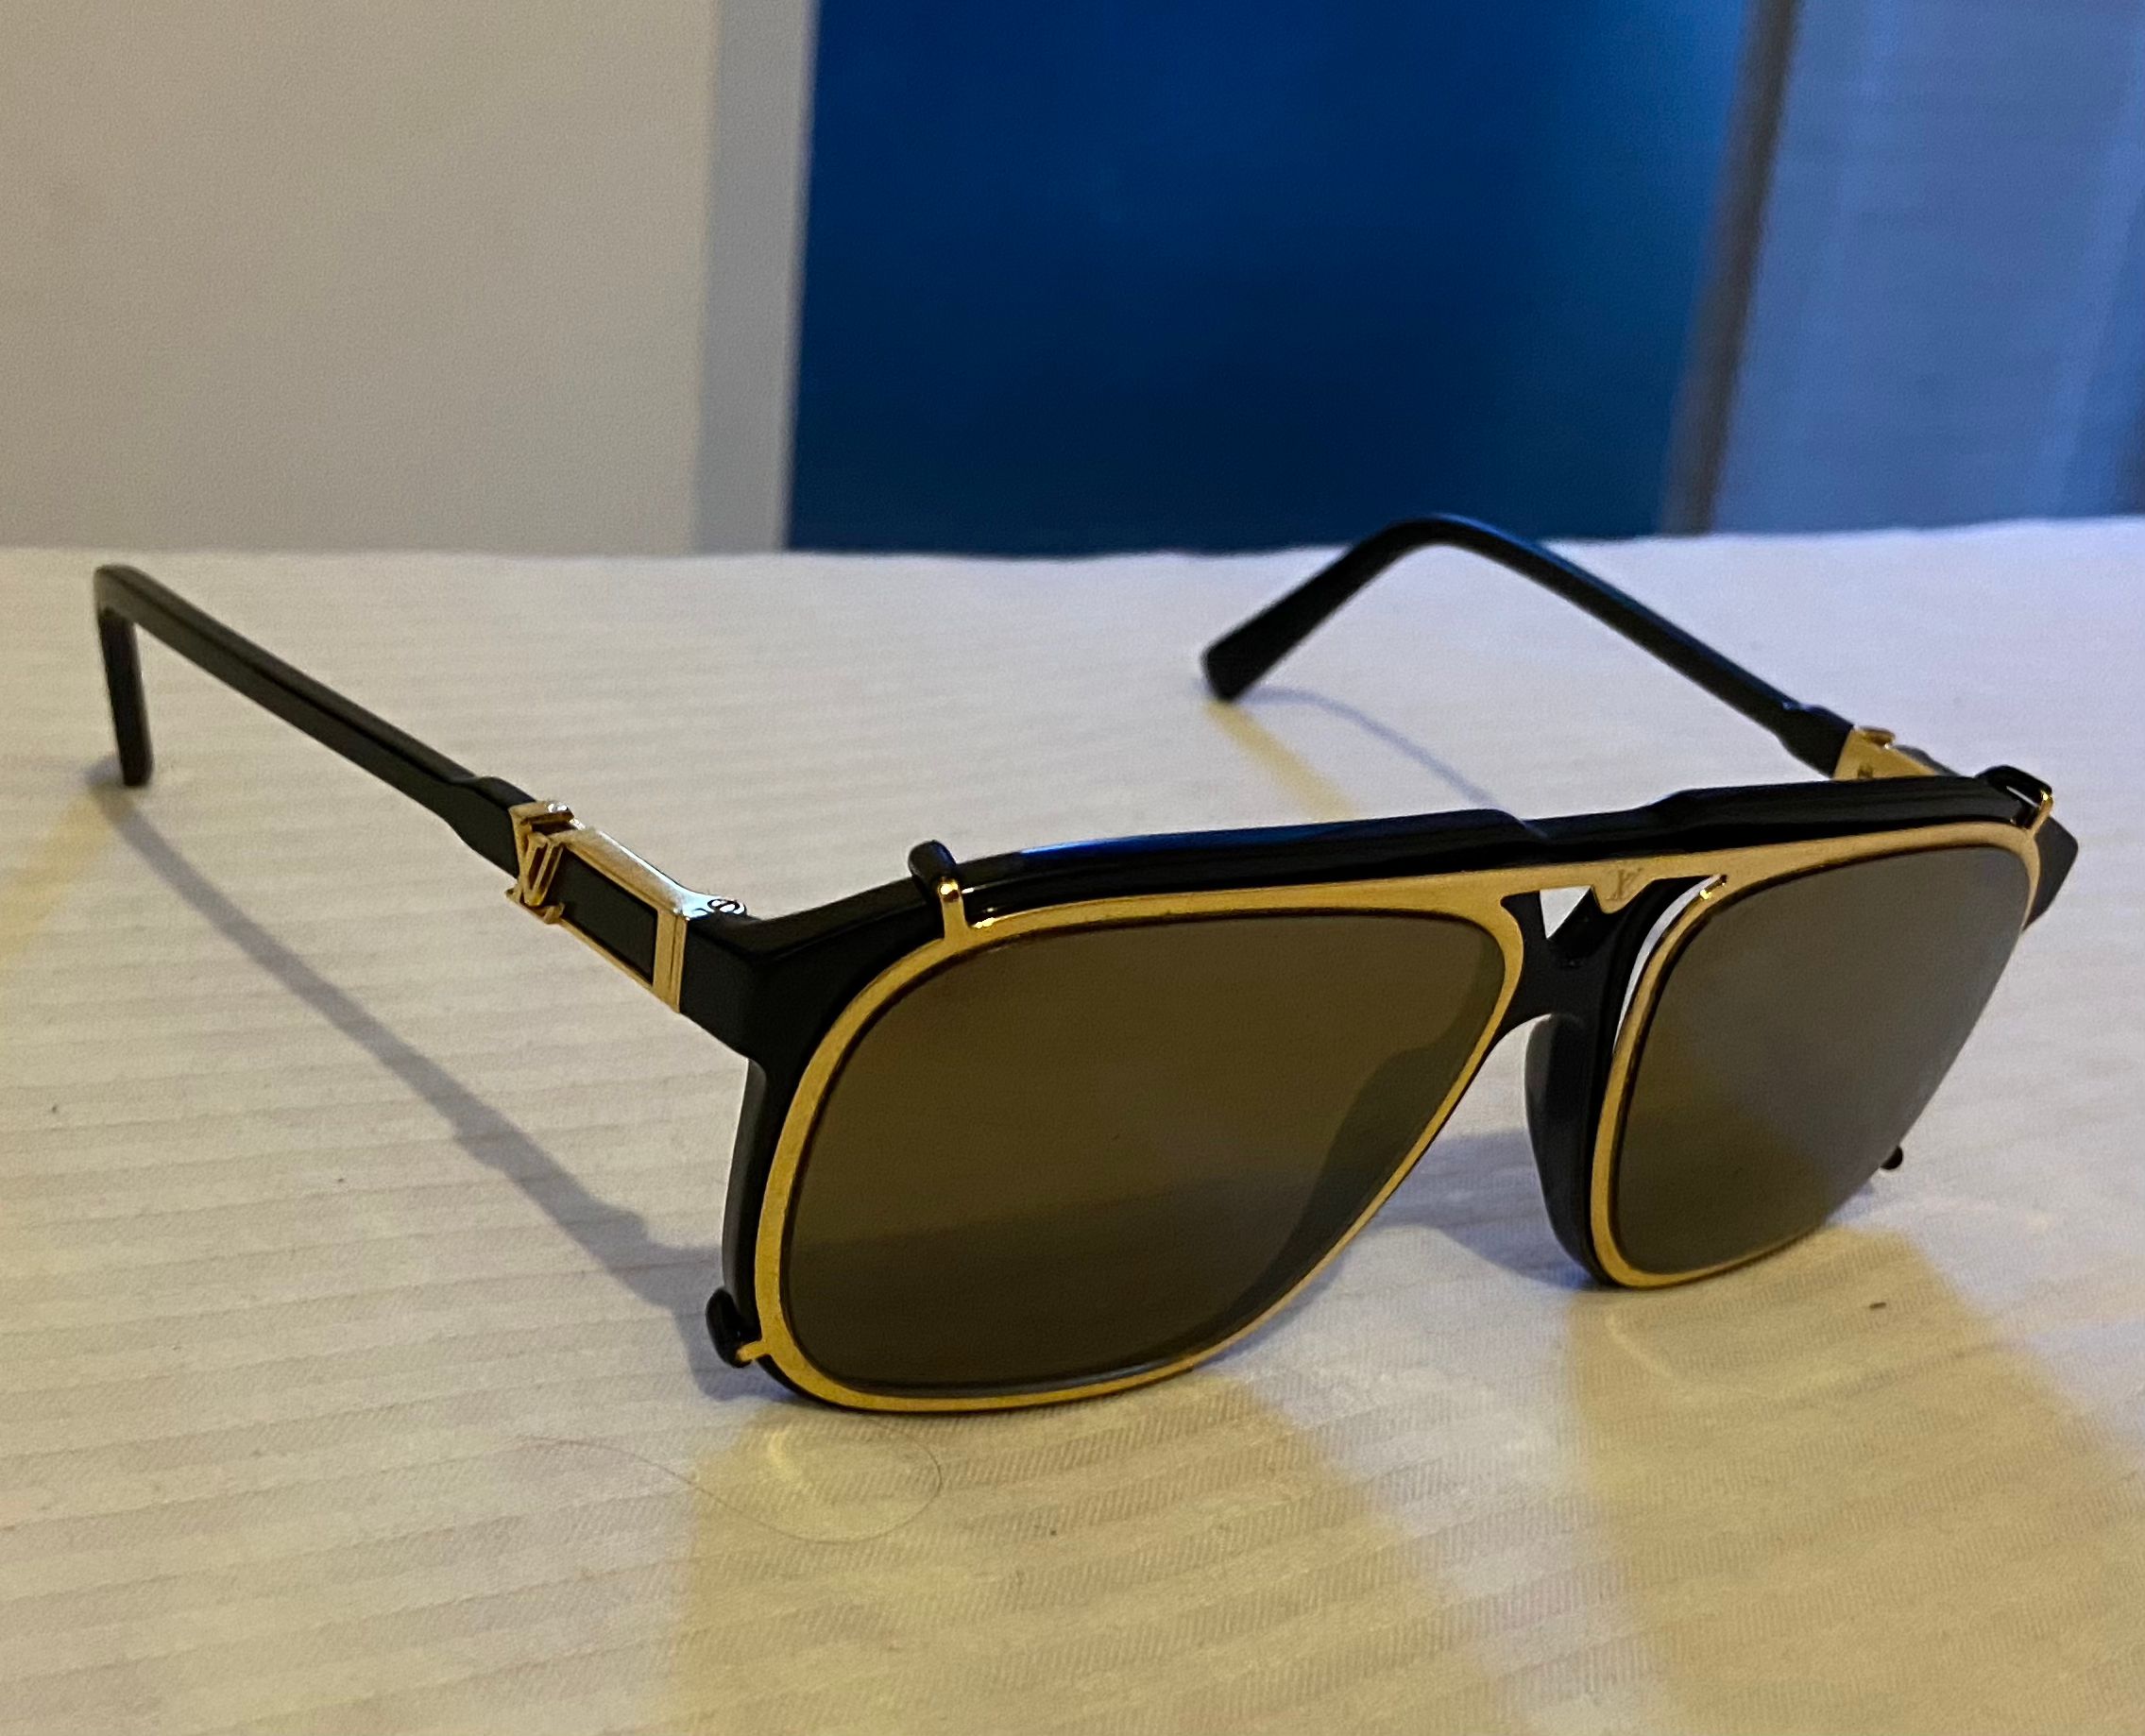 Compare prices for LV Satellite Sunglasses (Z1086W) in official stores